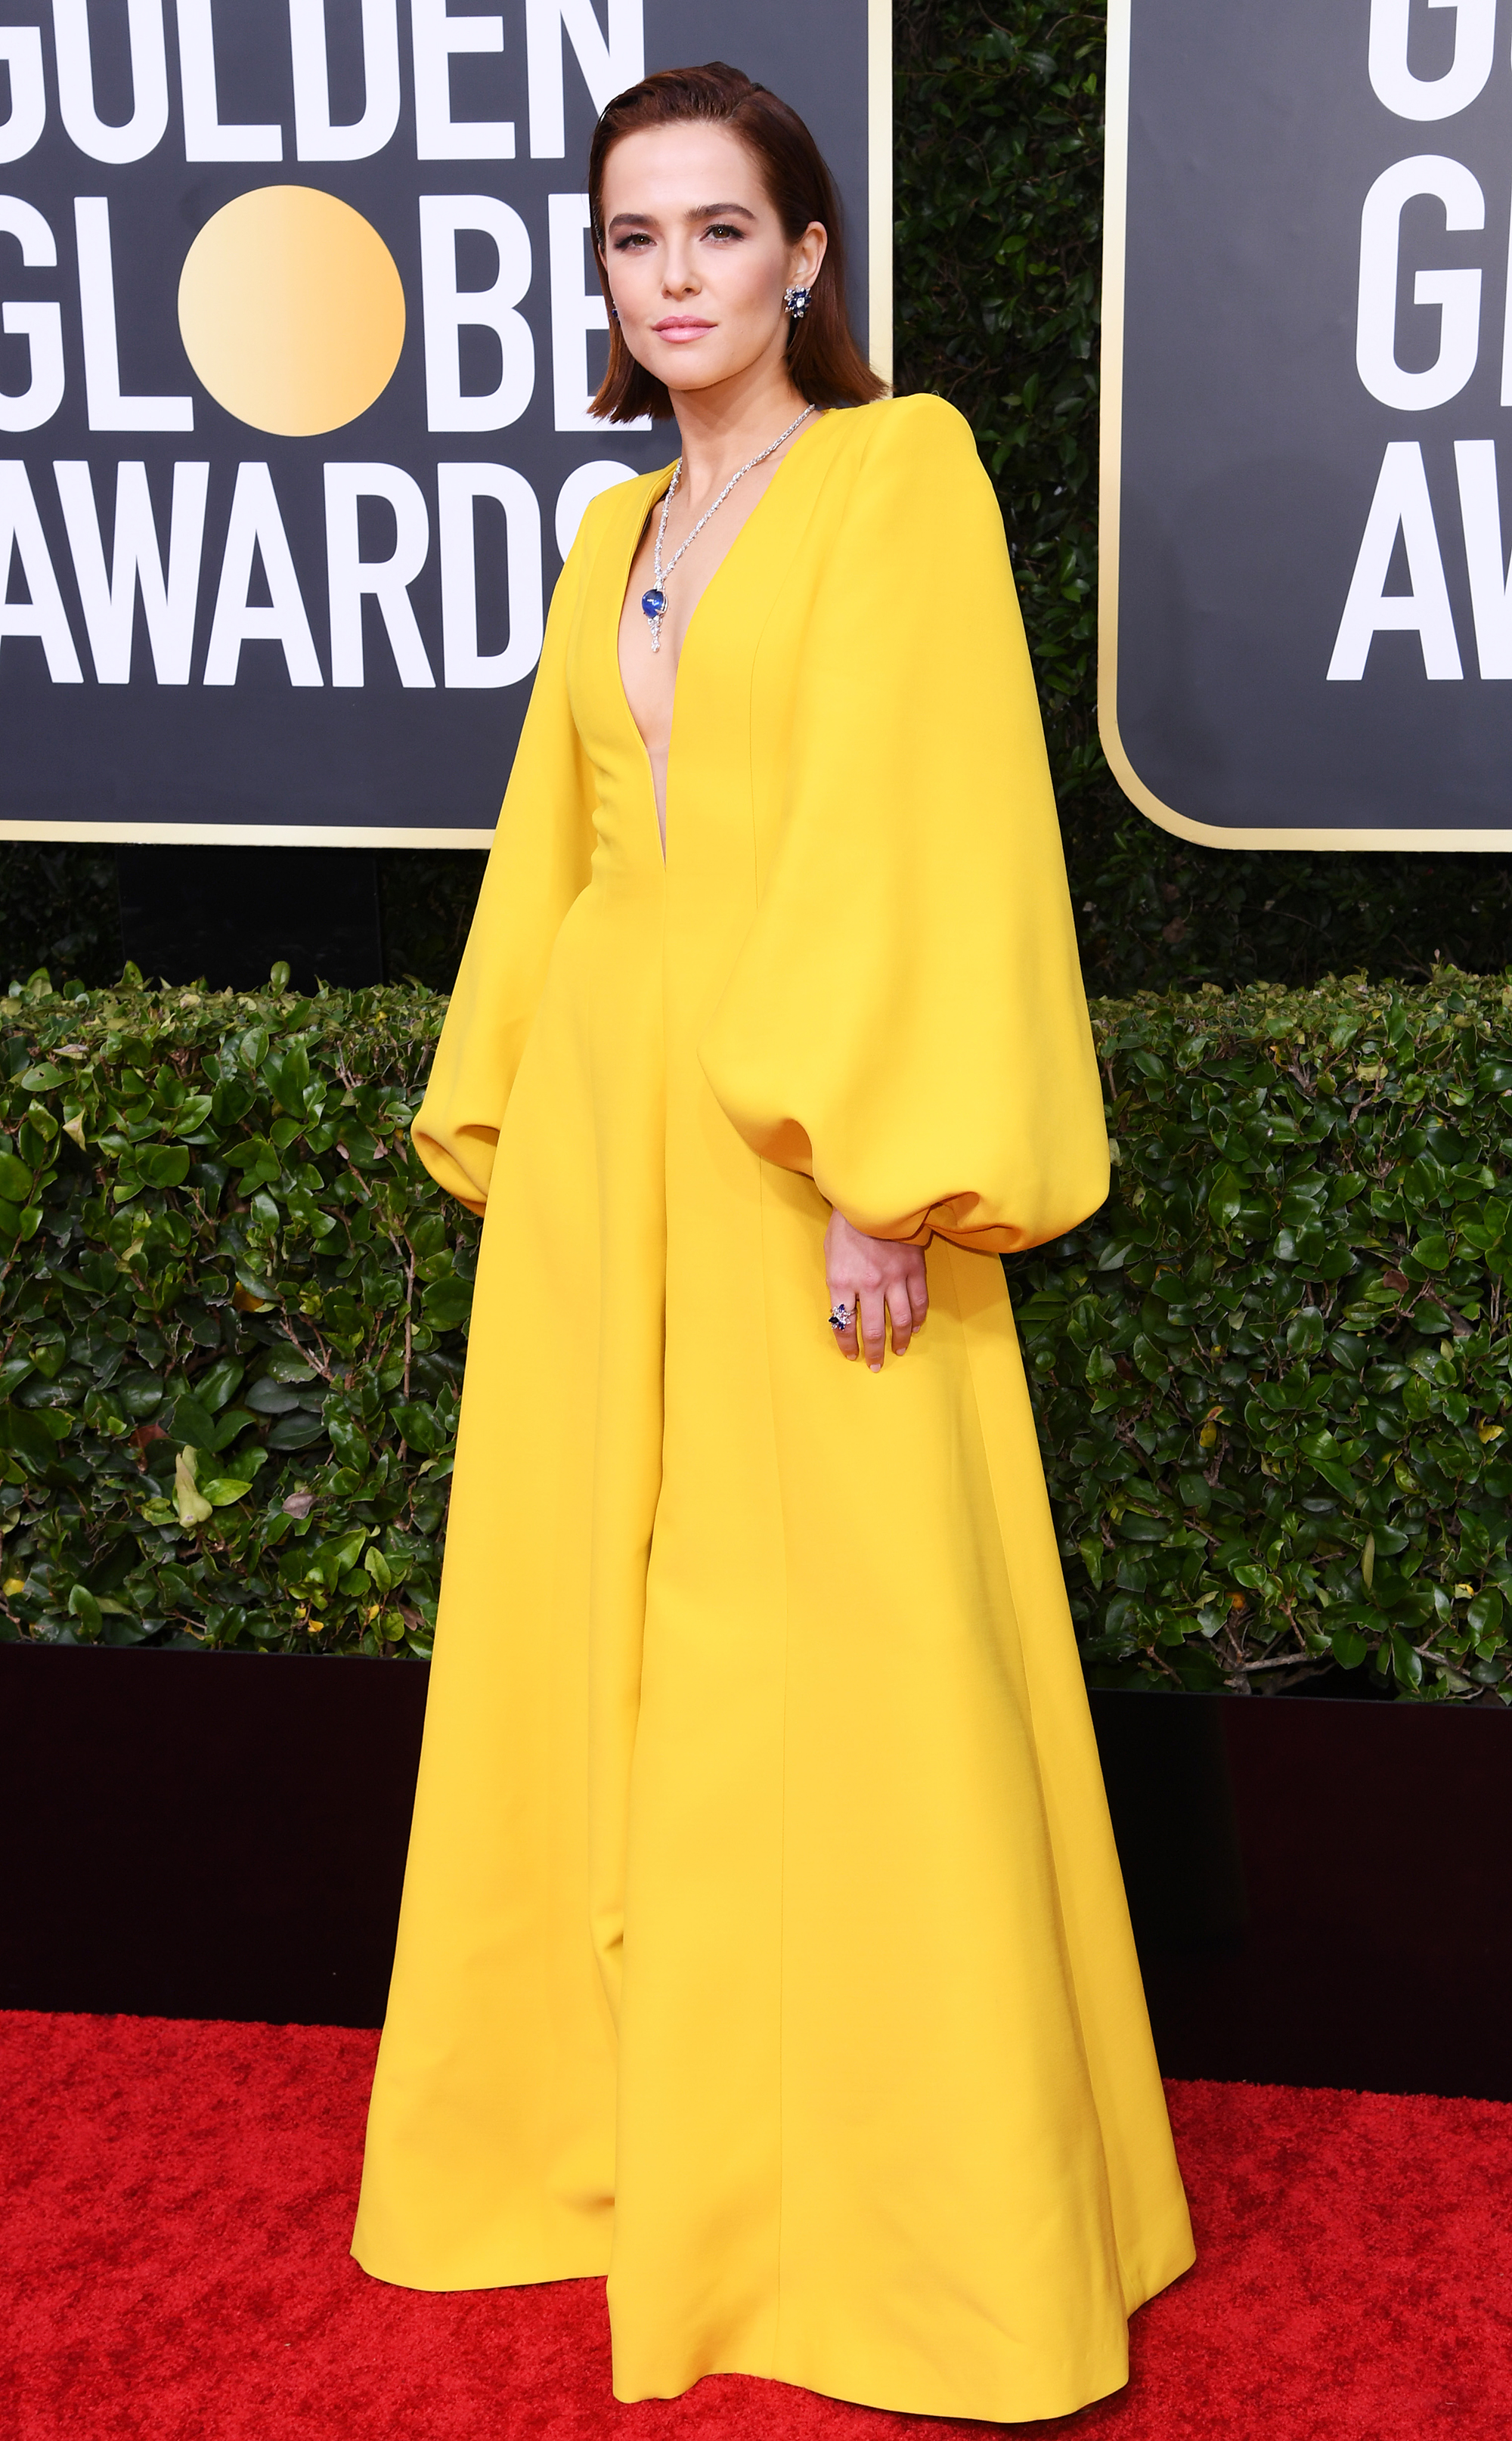 Golden Globes 2020 Red Carpet Fashion: See Celeb Dresses, Gowns